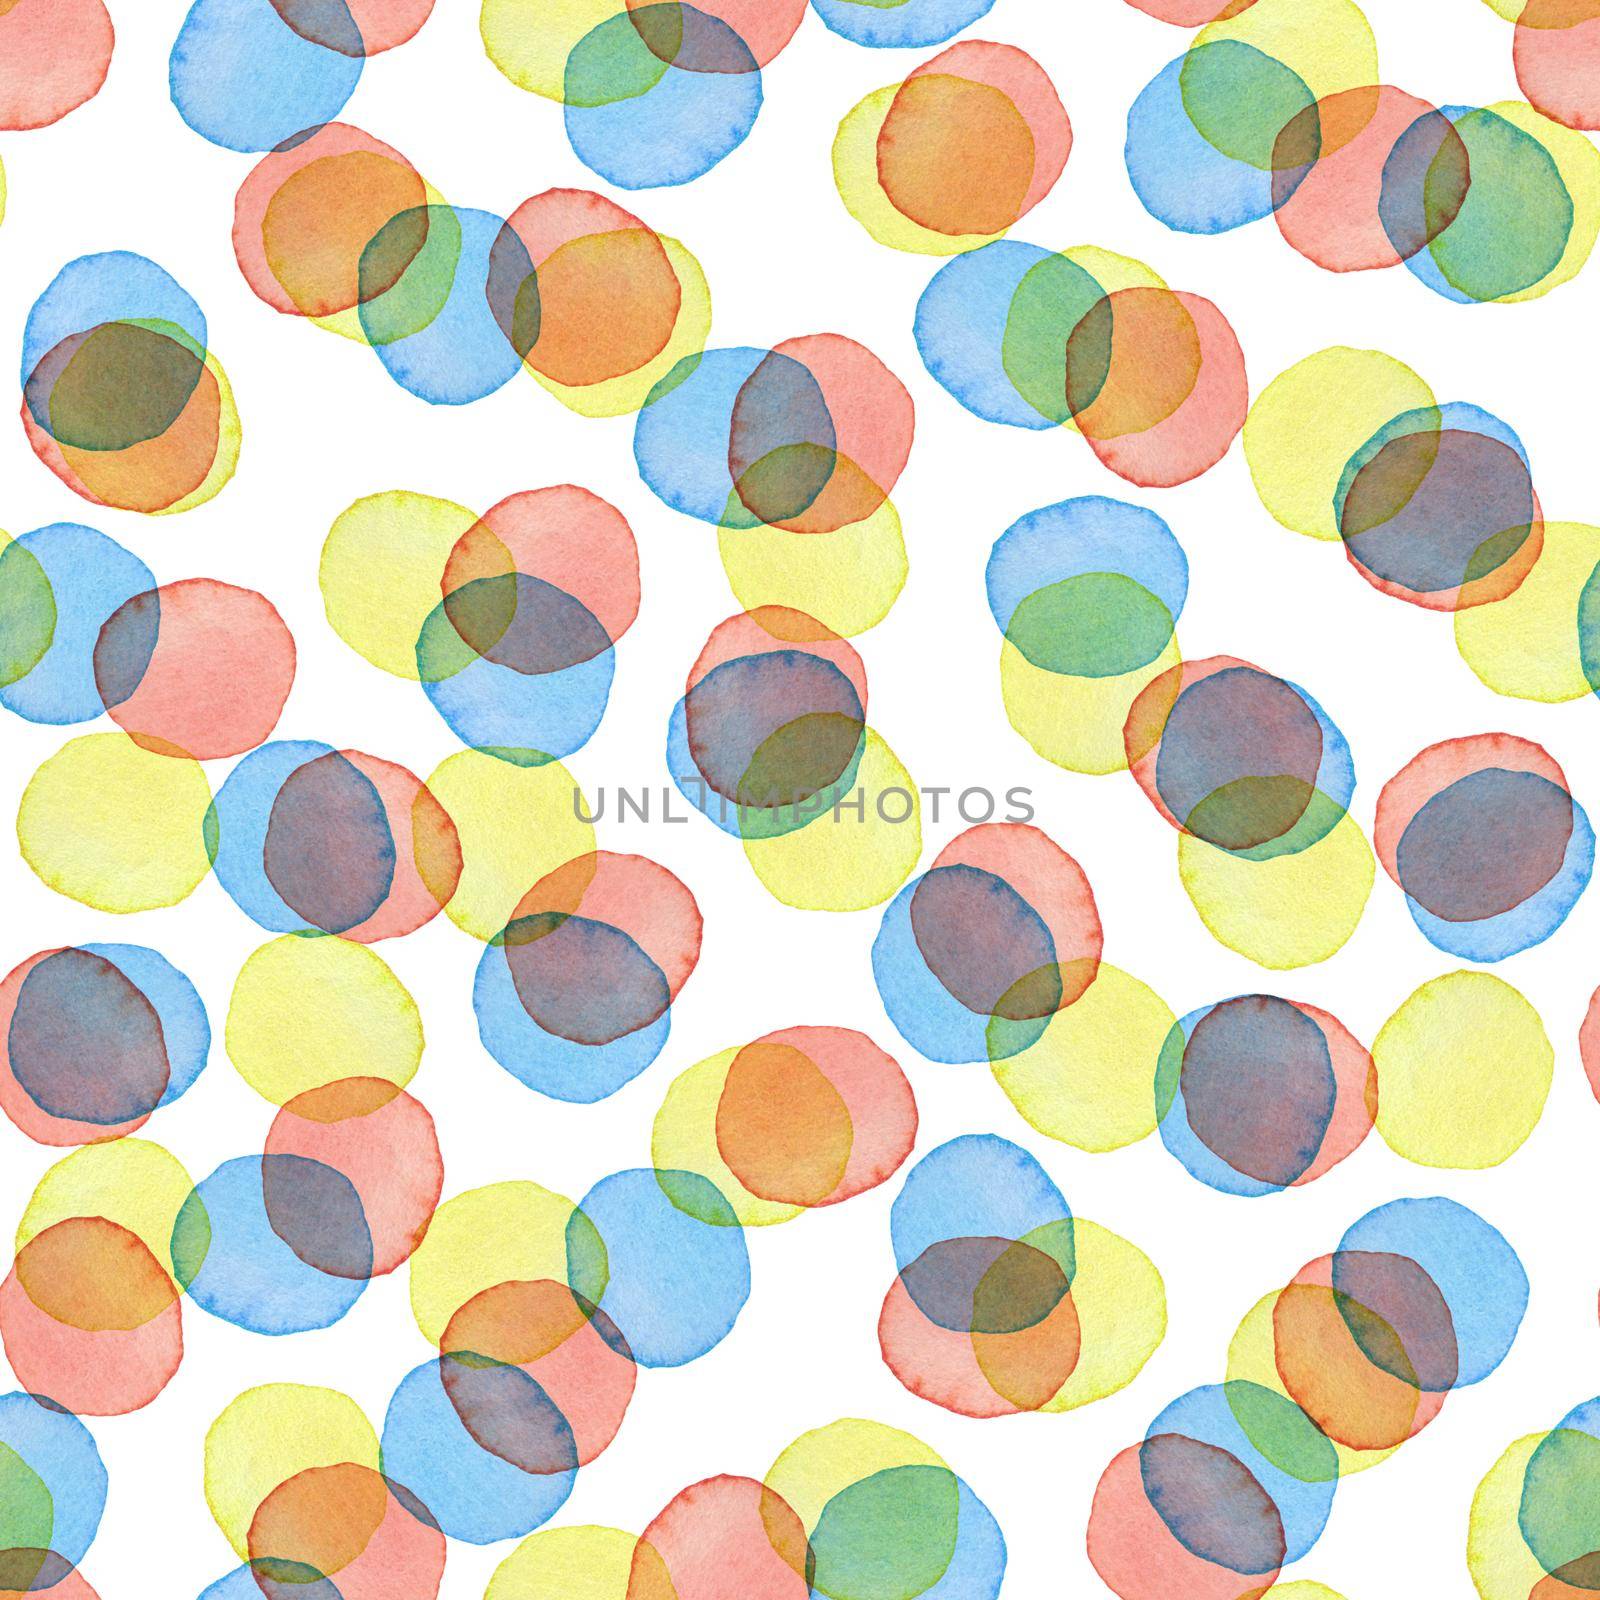 Hand Painted Polka Dot Seamless Watercolor Pattern. Circle Abstract watercolour shapes in Yellow Pink and Blue Color. Round Artistic Design for Fabric and Background.